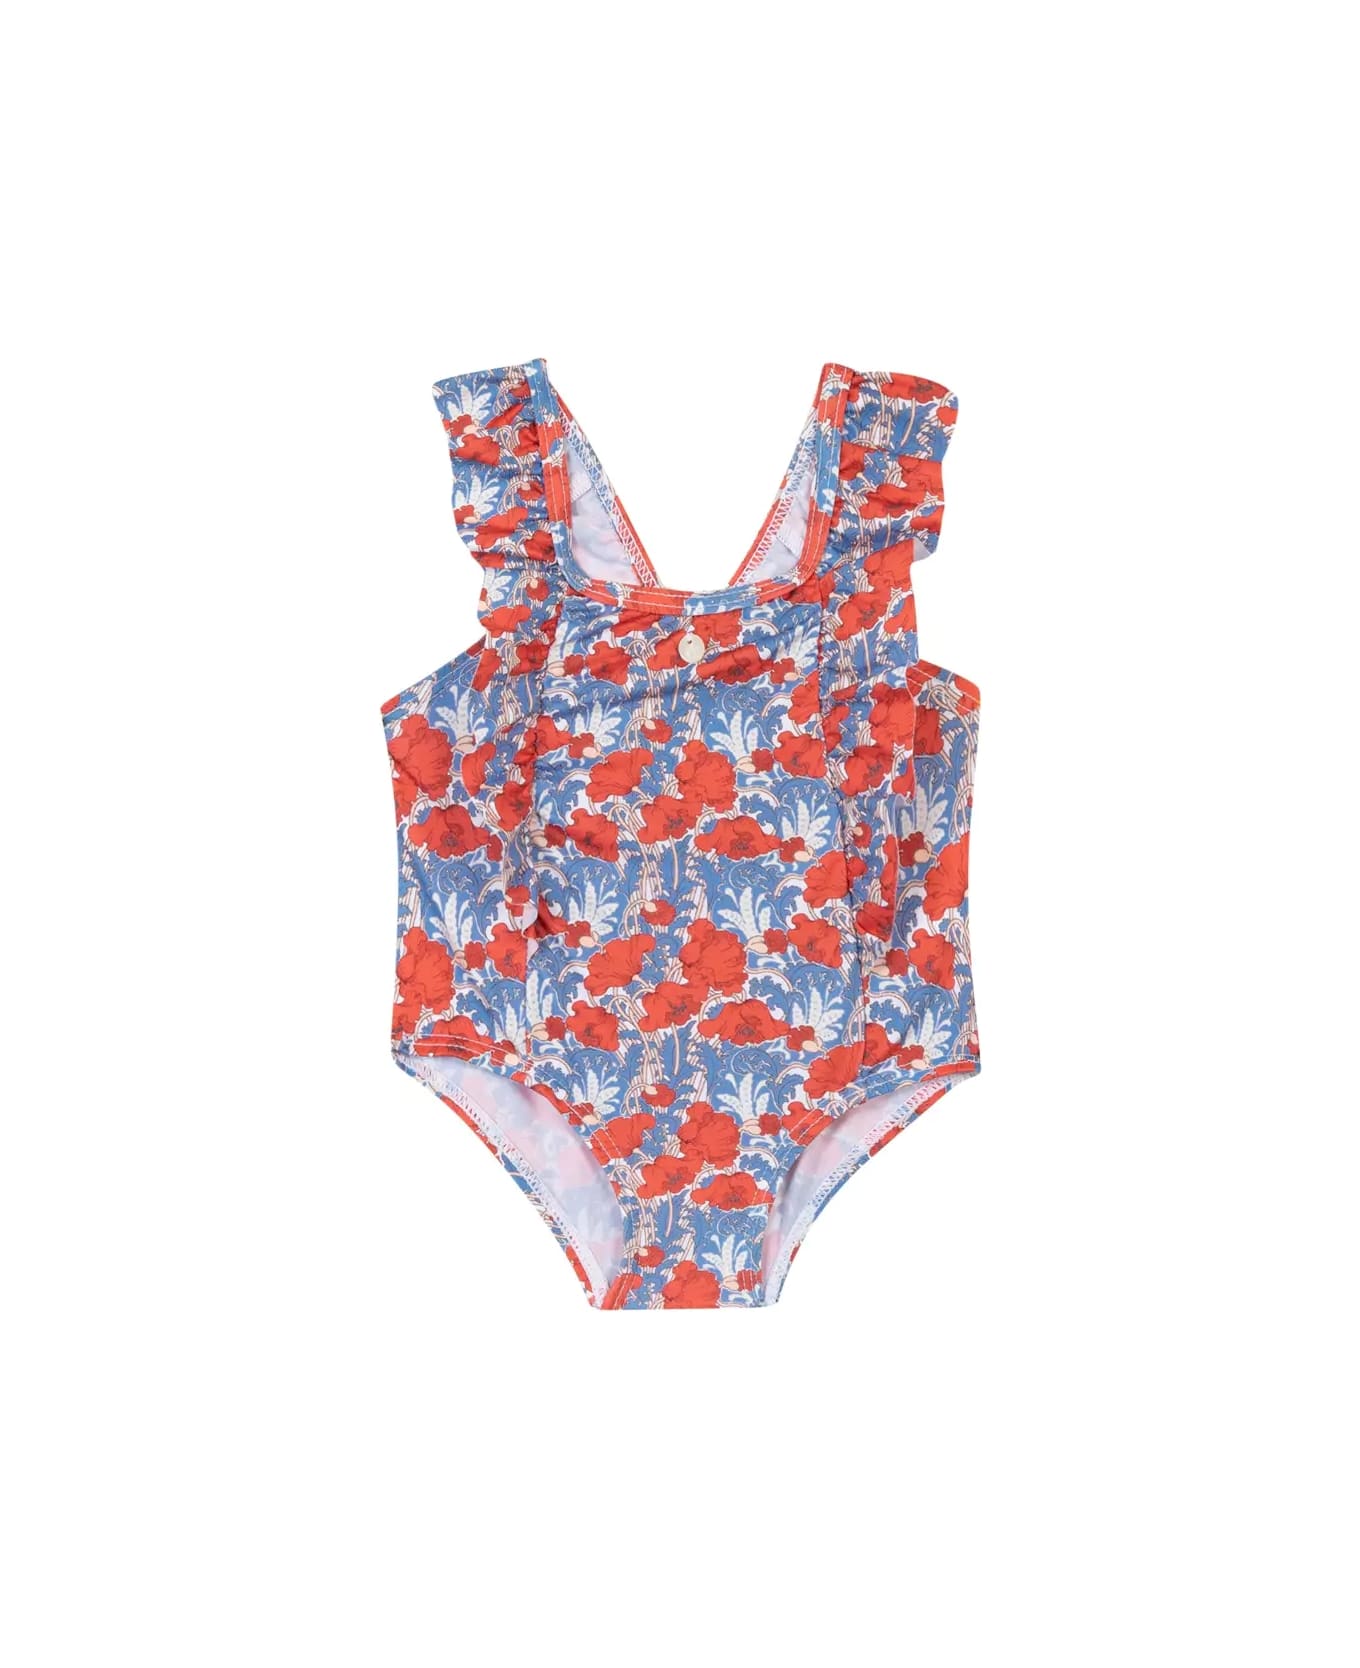 Tartine et Chocolat One-piece Swimsuit With Ruffles - Red